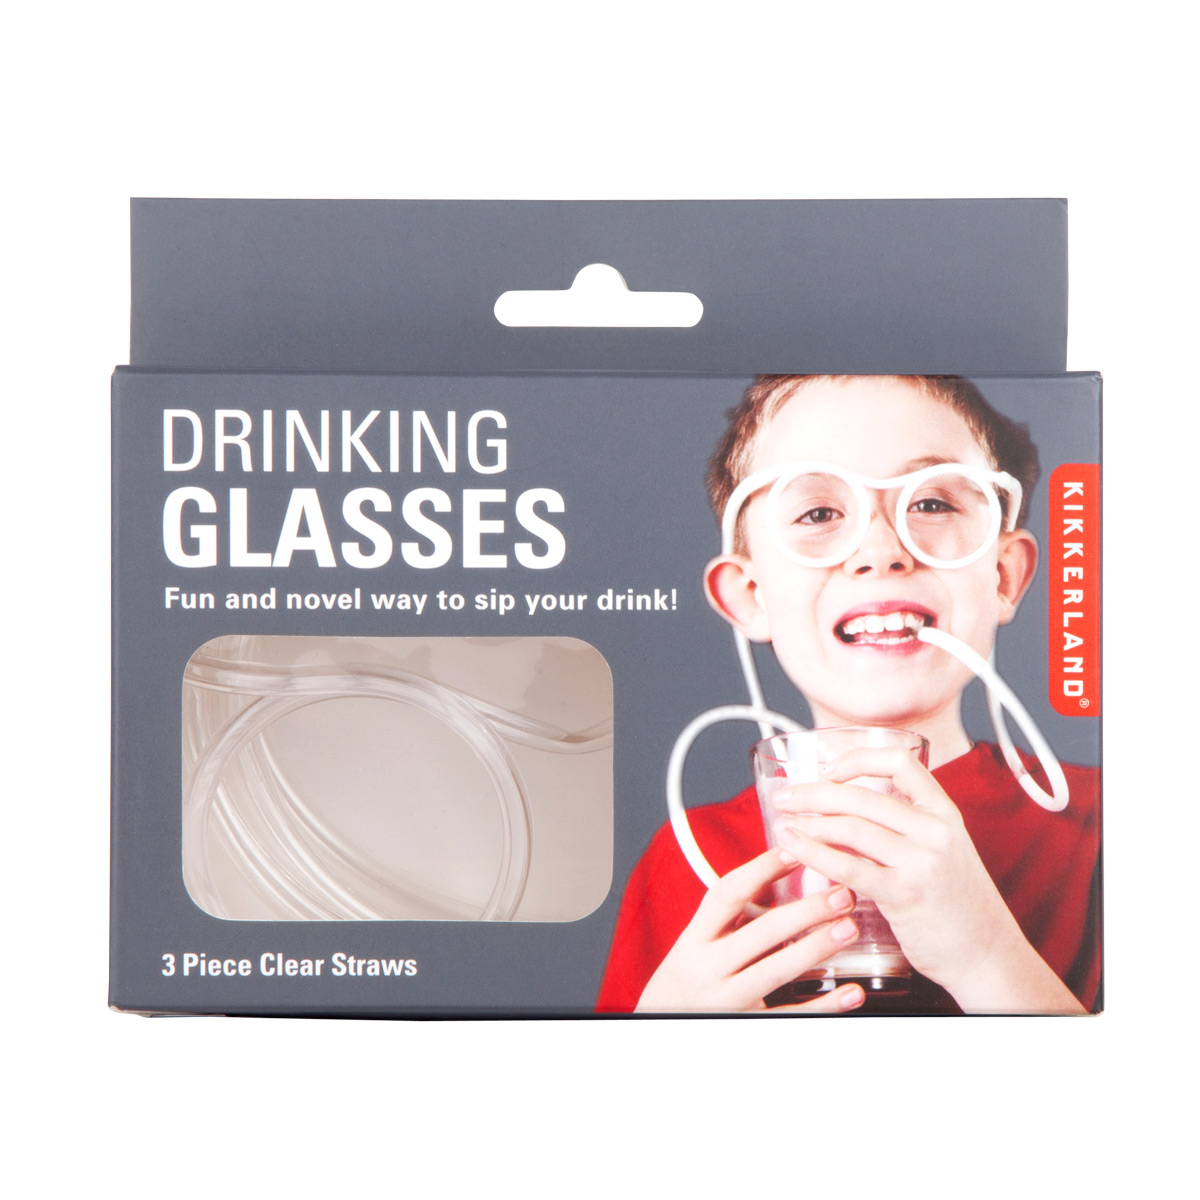 https://www.containerstore.com/catalogimages/376626/10077507_Drinking%20Glasses_PKG-VEN1.jpg